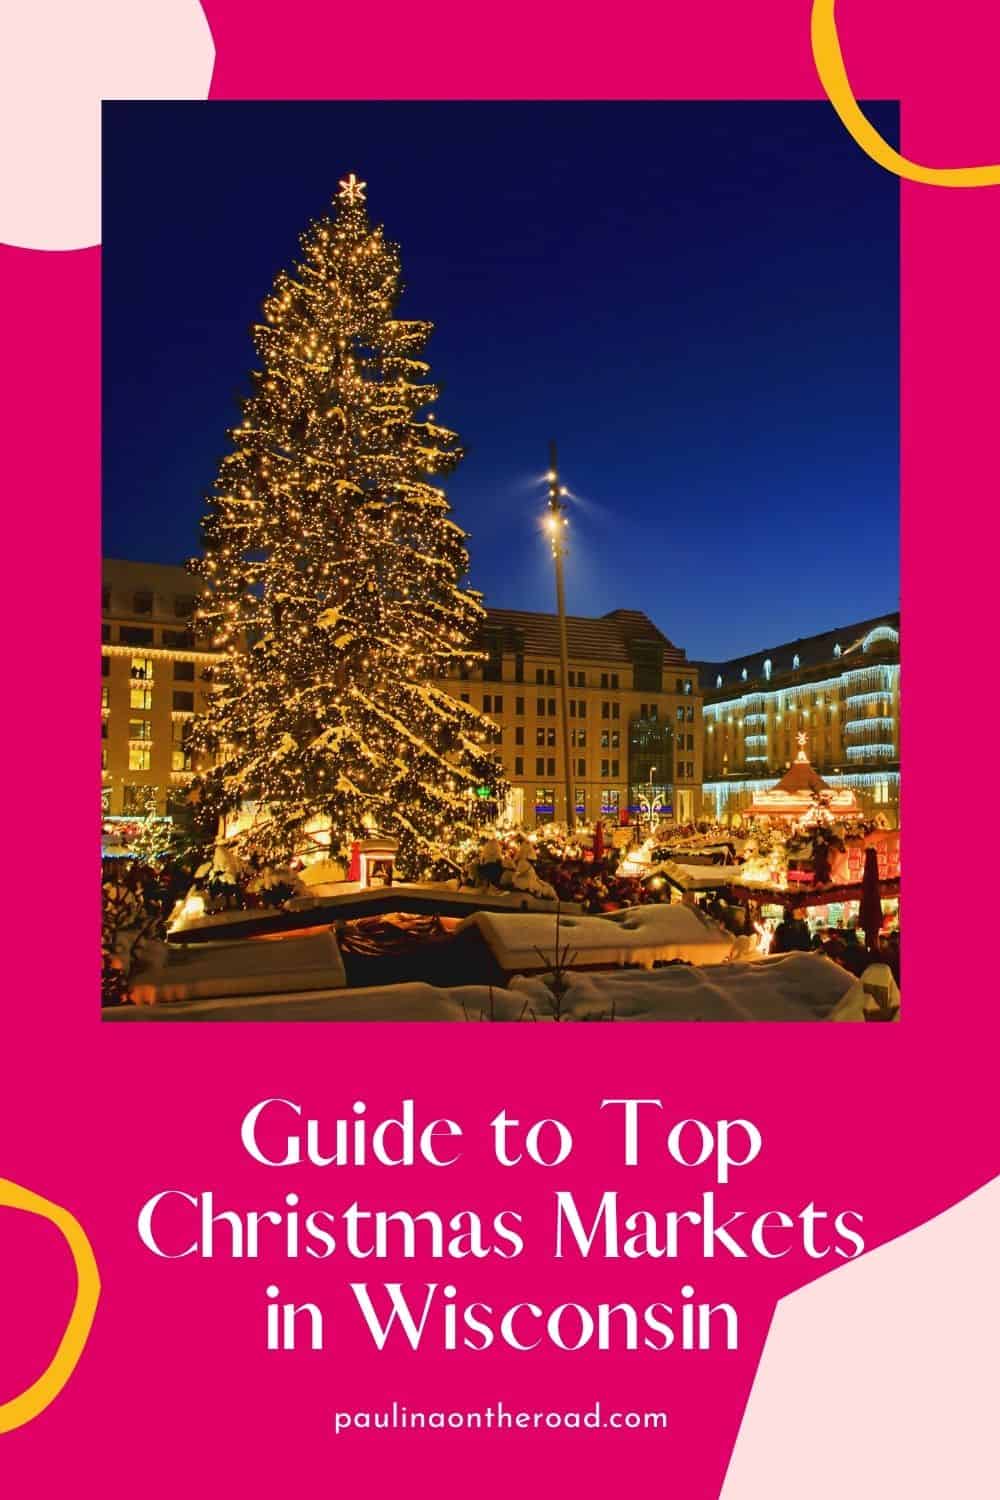 15 Most Magical Christmas Markets in Wisconsin Paulina on the road